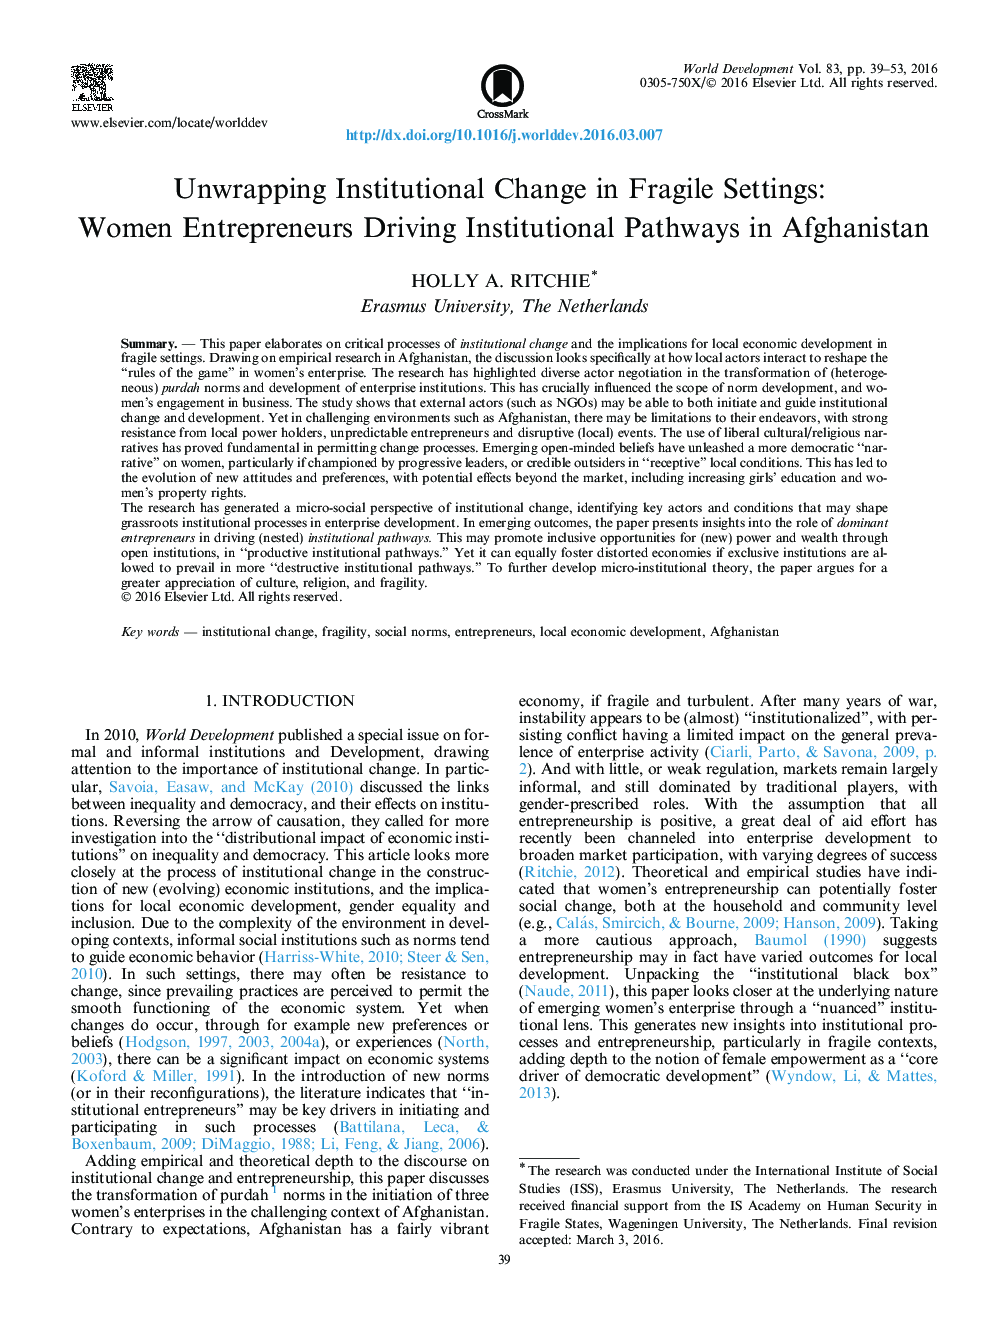 Unwrapping Institutional Change in Fragile Settings: Women Entrepreneurs Driving Institutional Pathways in Afghanistan